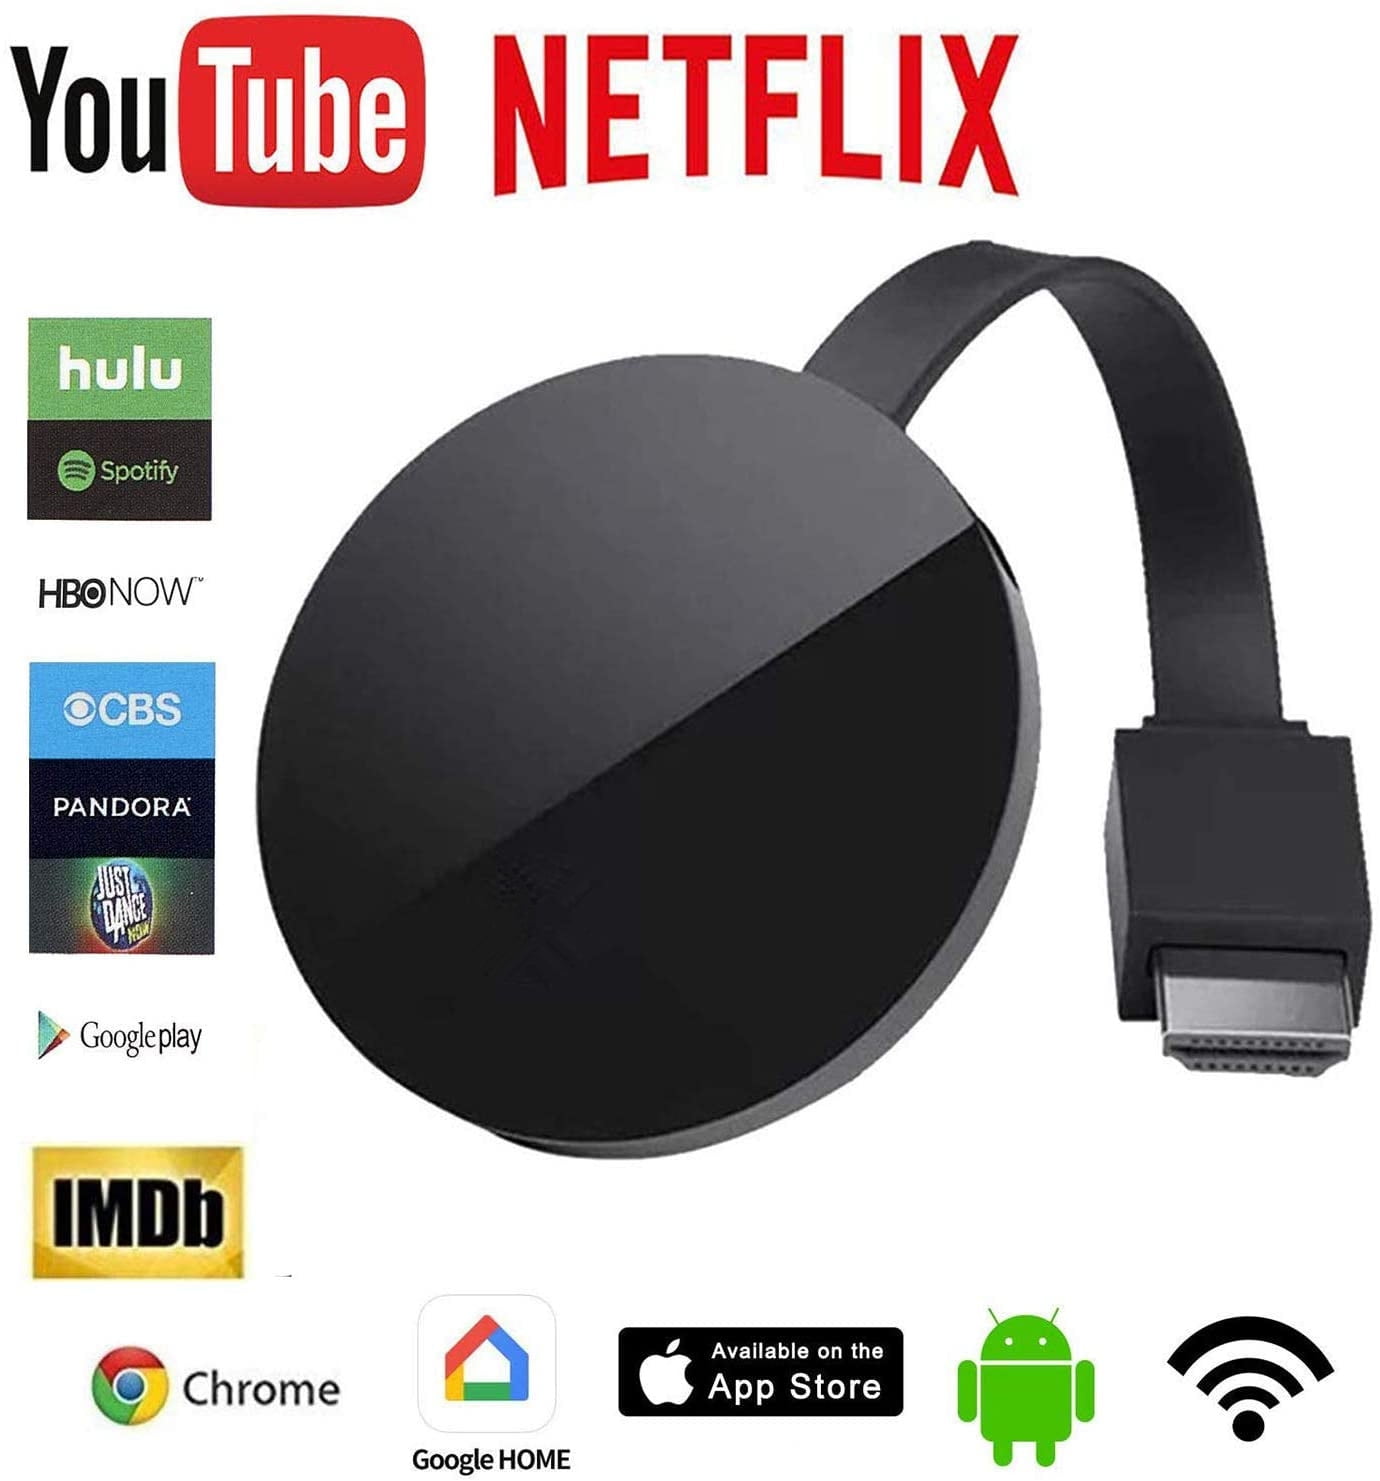 Wireless HDMI Display Dongle Adapter 1080P Wireless Display Receiver Support Miracast Airplay DLNA Streaming Client Compatible with Chromecast Compatible for Android iOS Phone PC TV Monitor Projector 